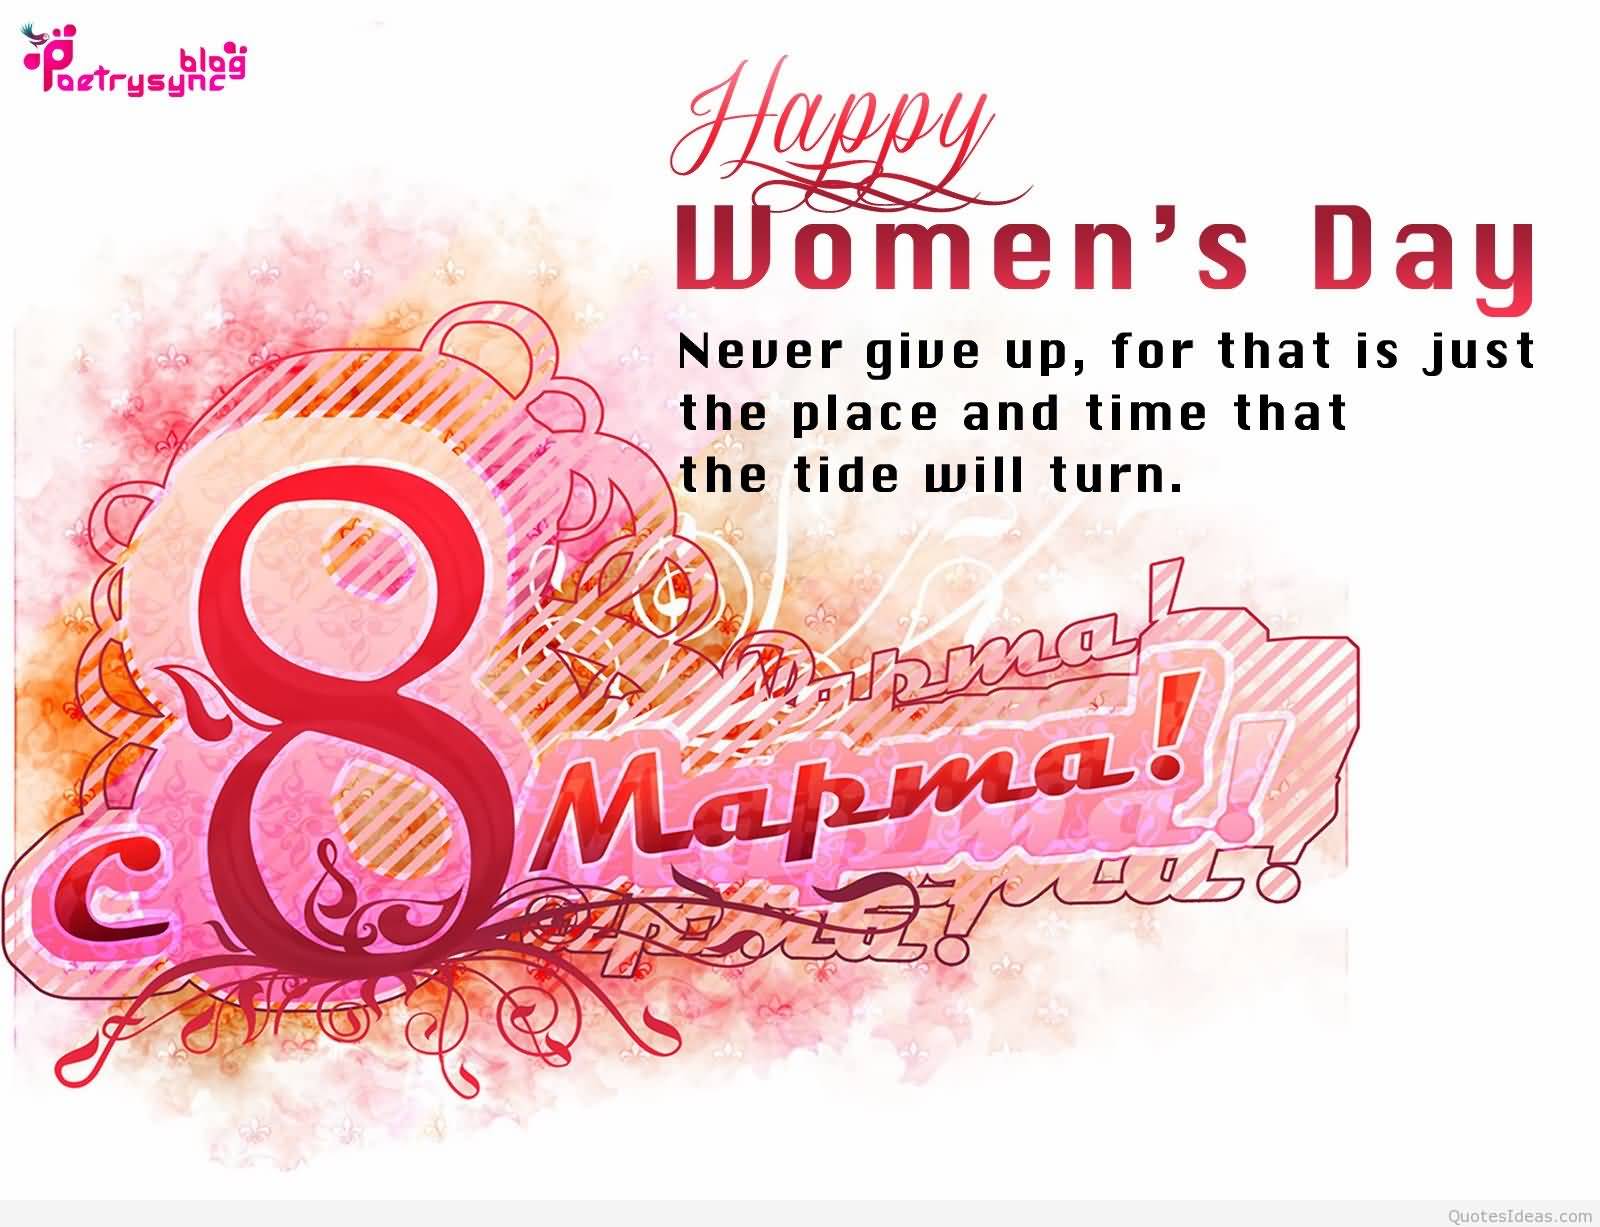 Happy Women's Day Never Give Up, For That Is Just The Place and Time That The Tide Will Turn